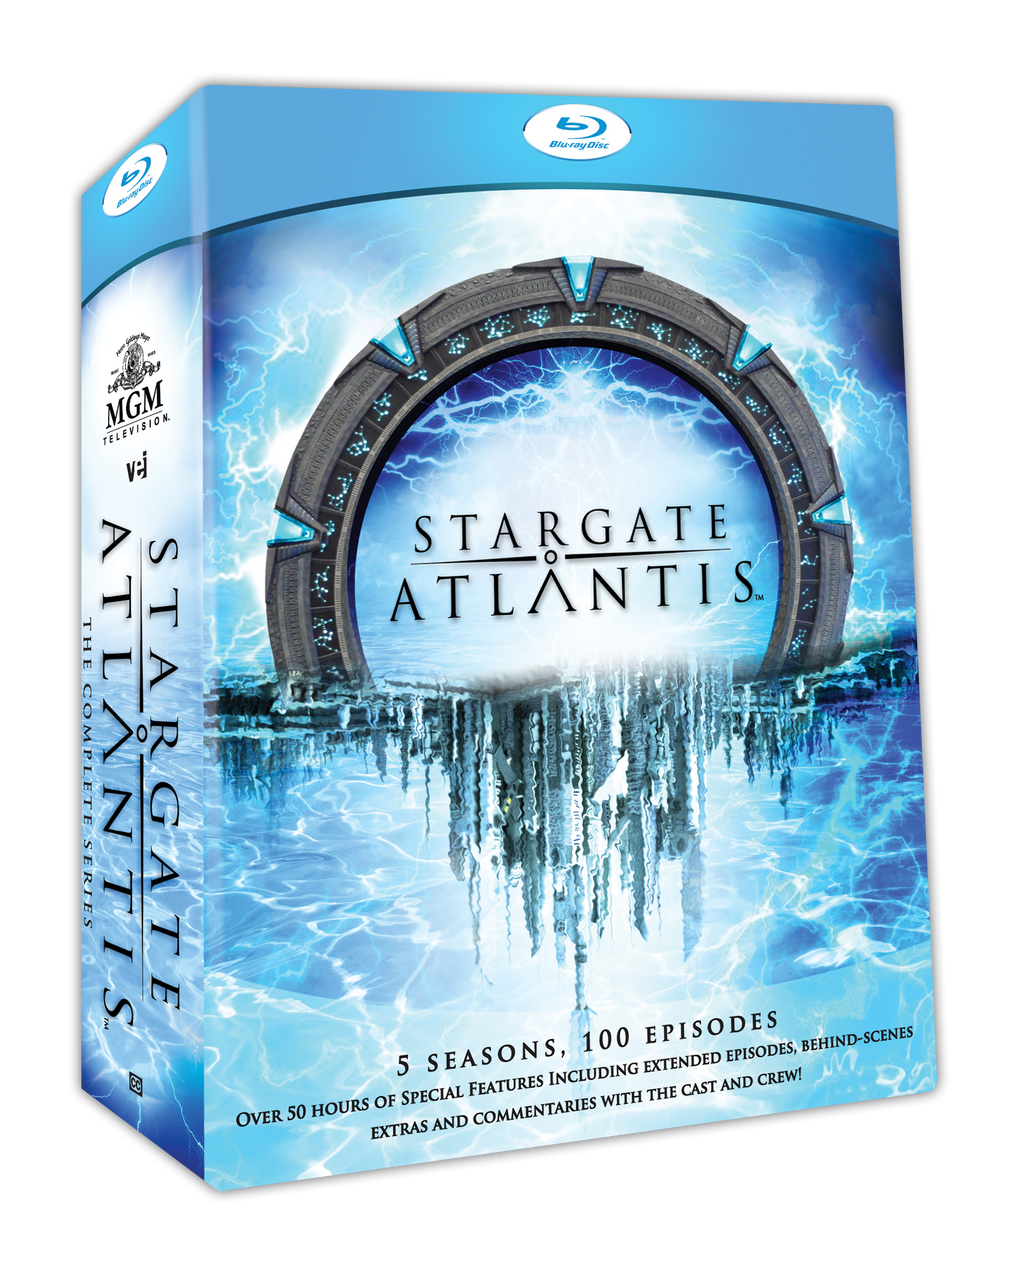 Stargate Atlantis - The Complete Series - New Super Enhanced picture [Blu Ray] #7142